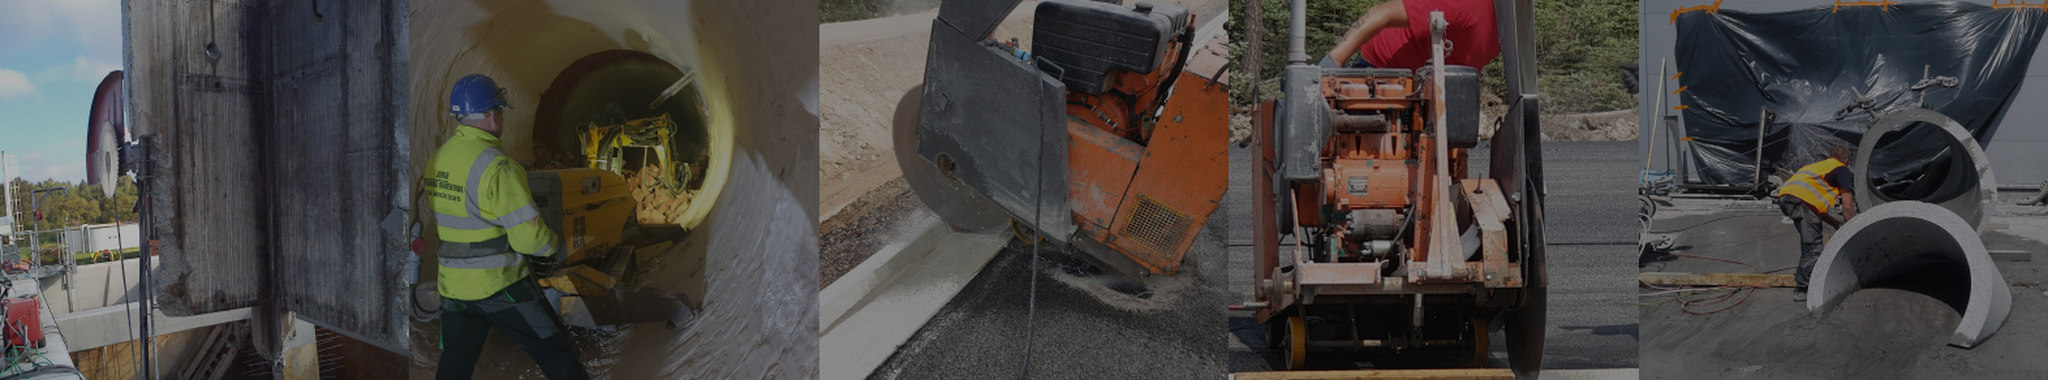 Cutting reinforced concrete